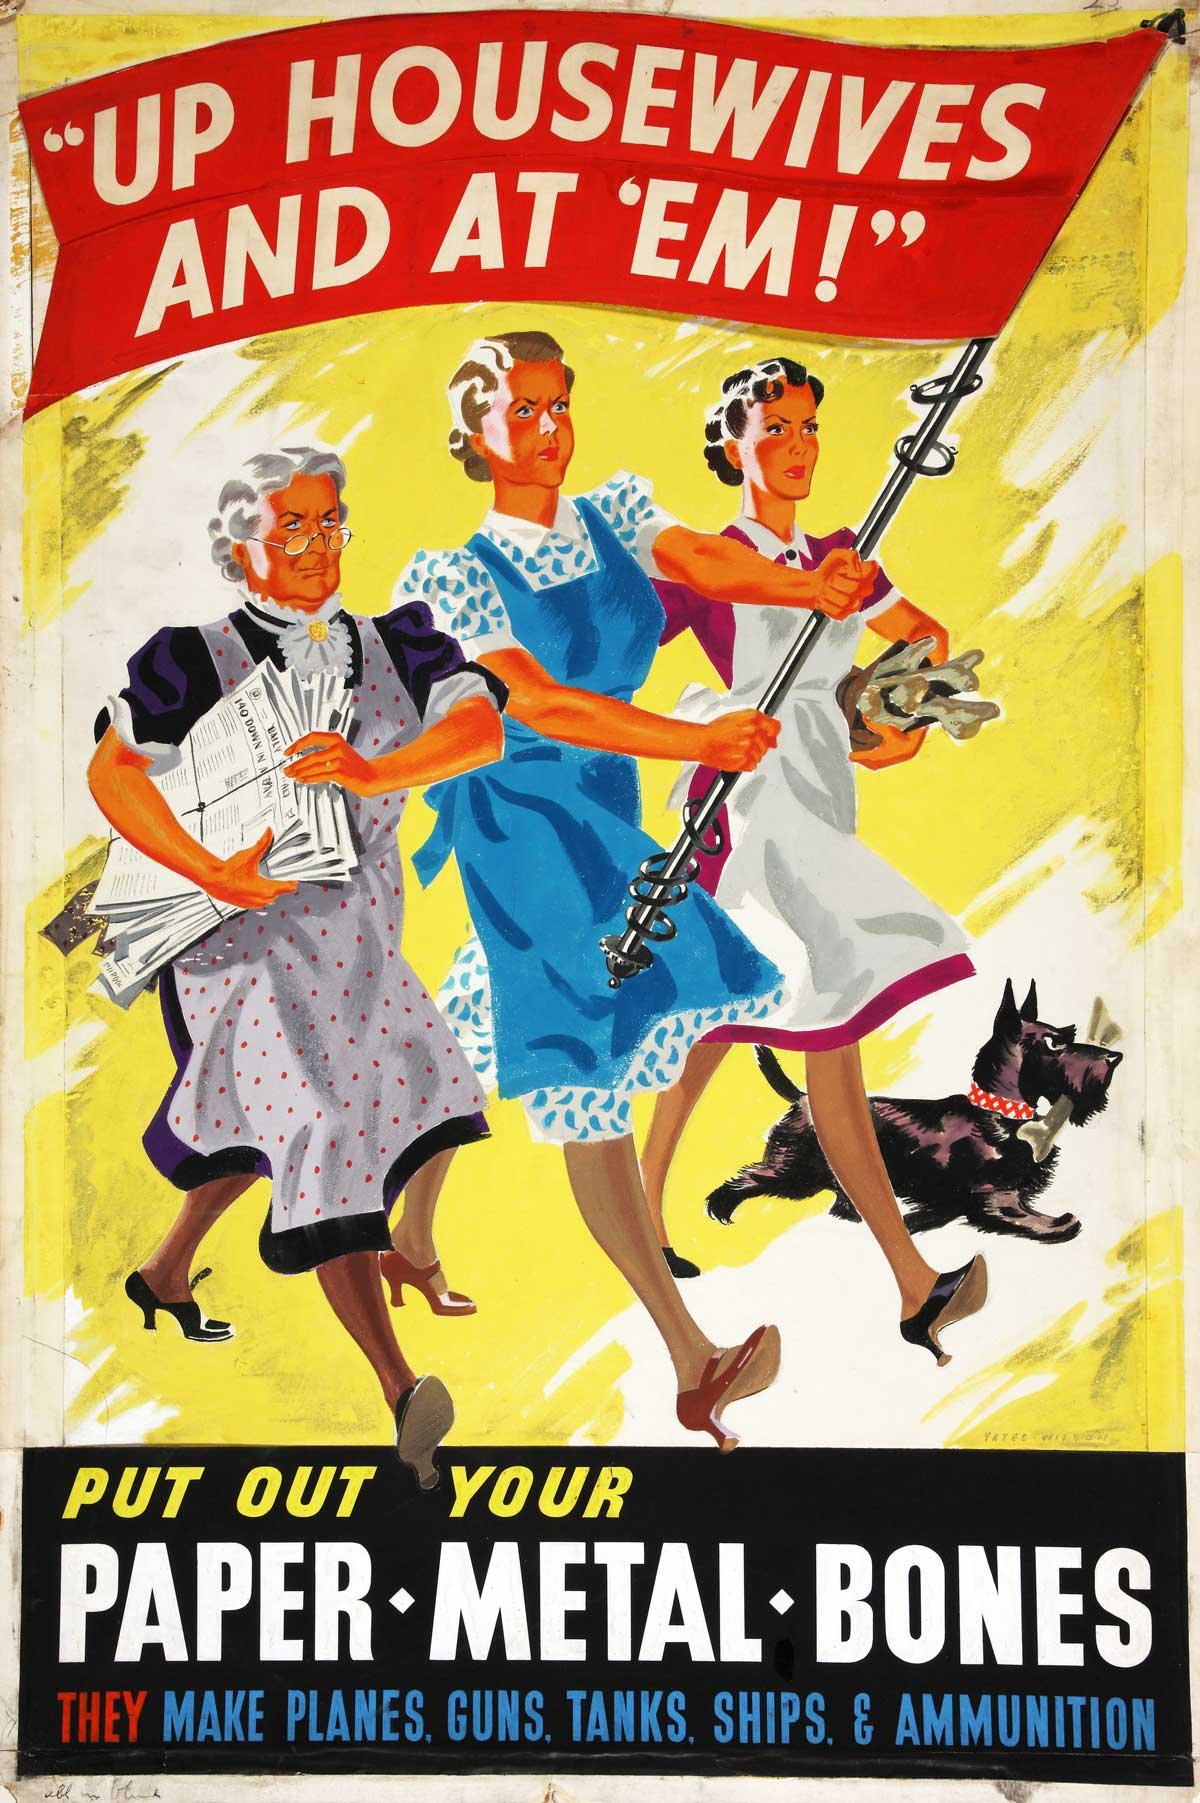 Colourful painting of three women in aprons striding forwards with a large red flag.